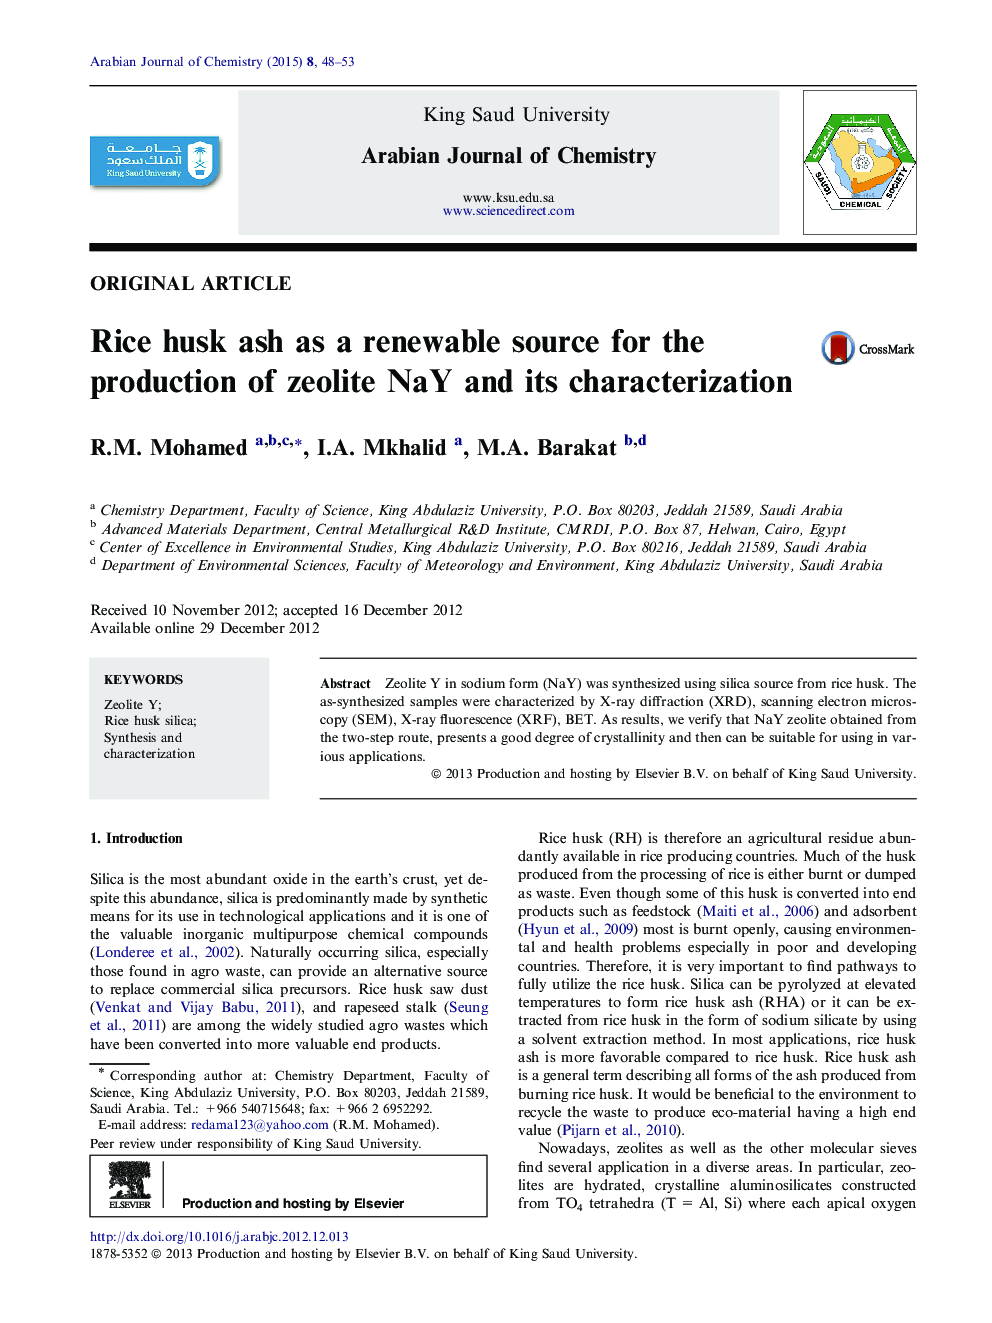 Rice husk ash as a renewable source for the production of zeolite NaY and its characterization 